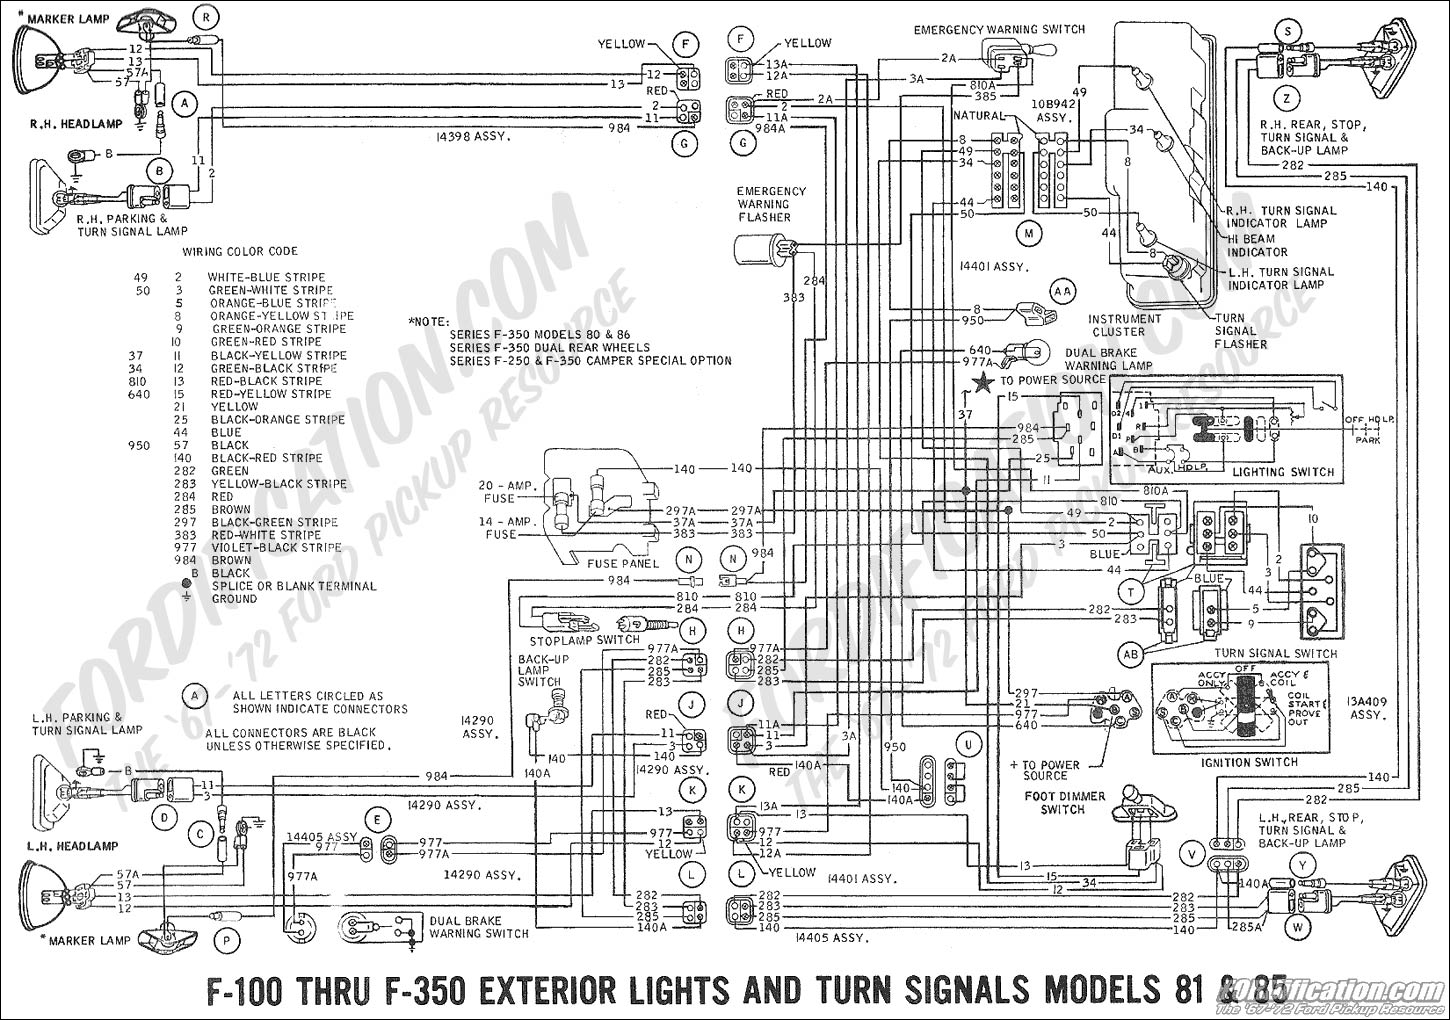 Ford Truck Technical Drawings and Schematics - Section H - Wiring Diagrams  FORDification.com